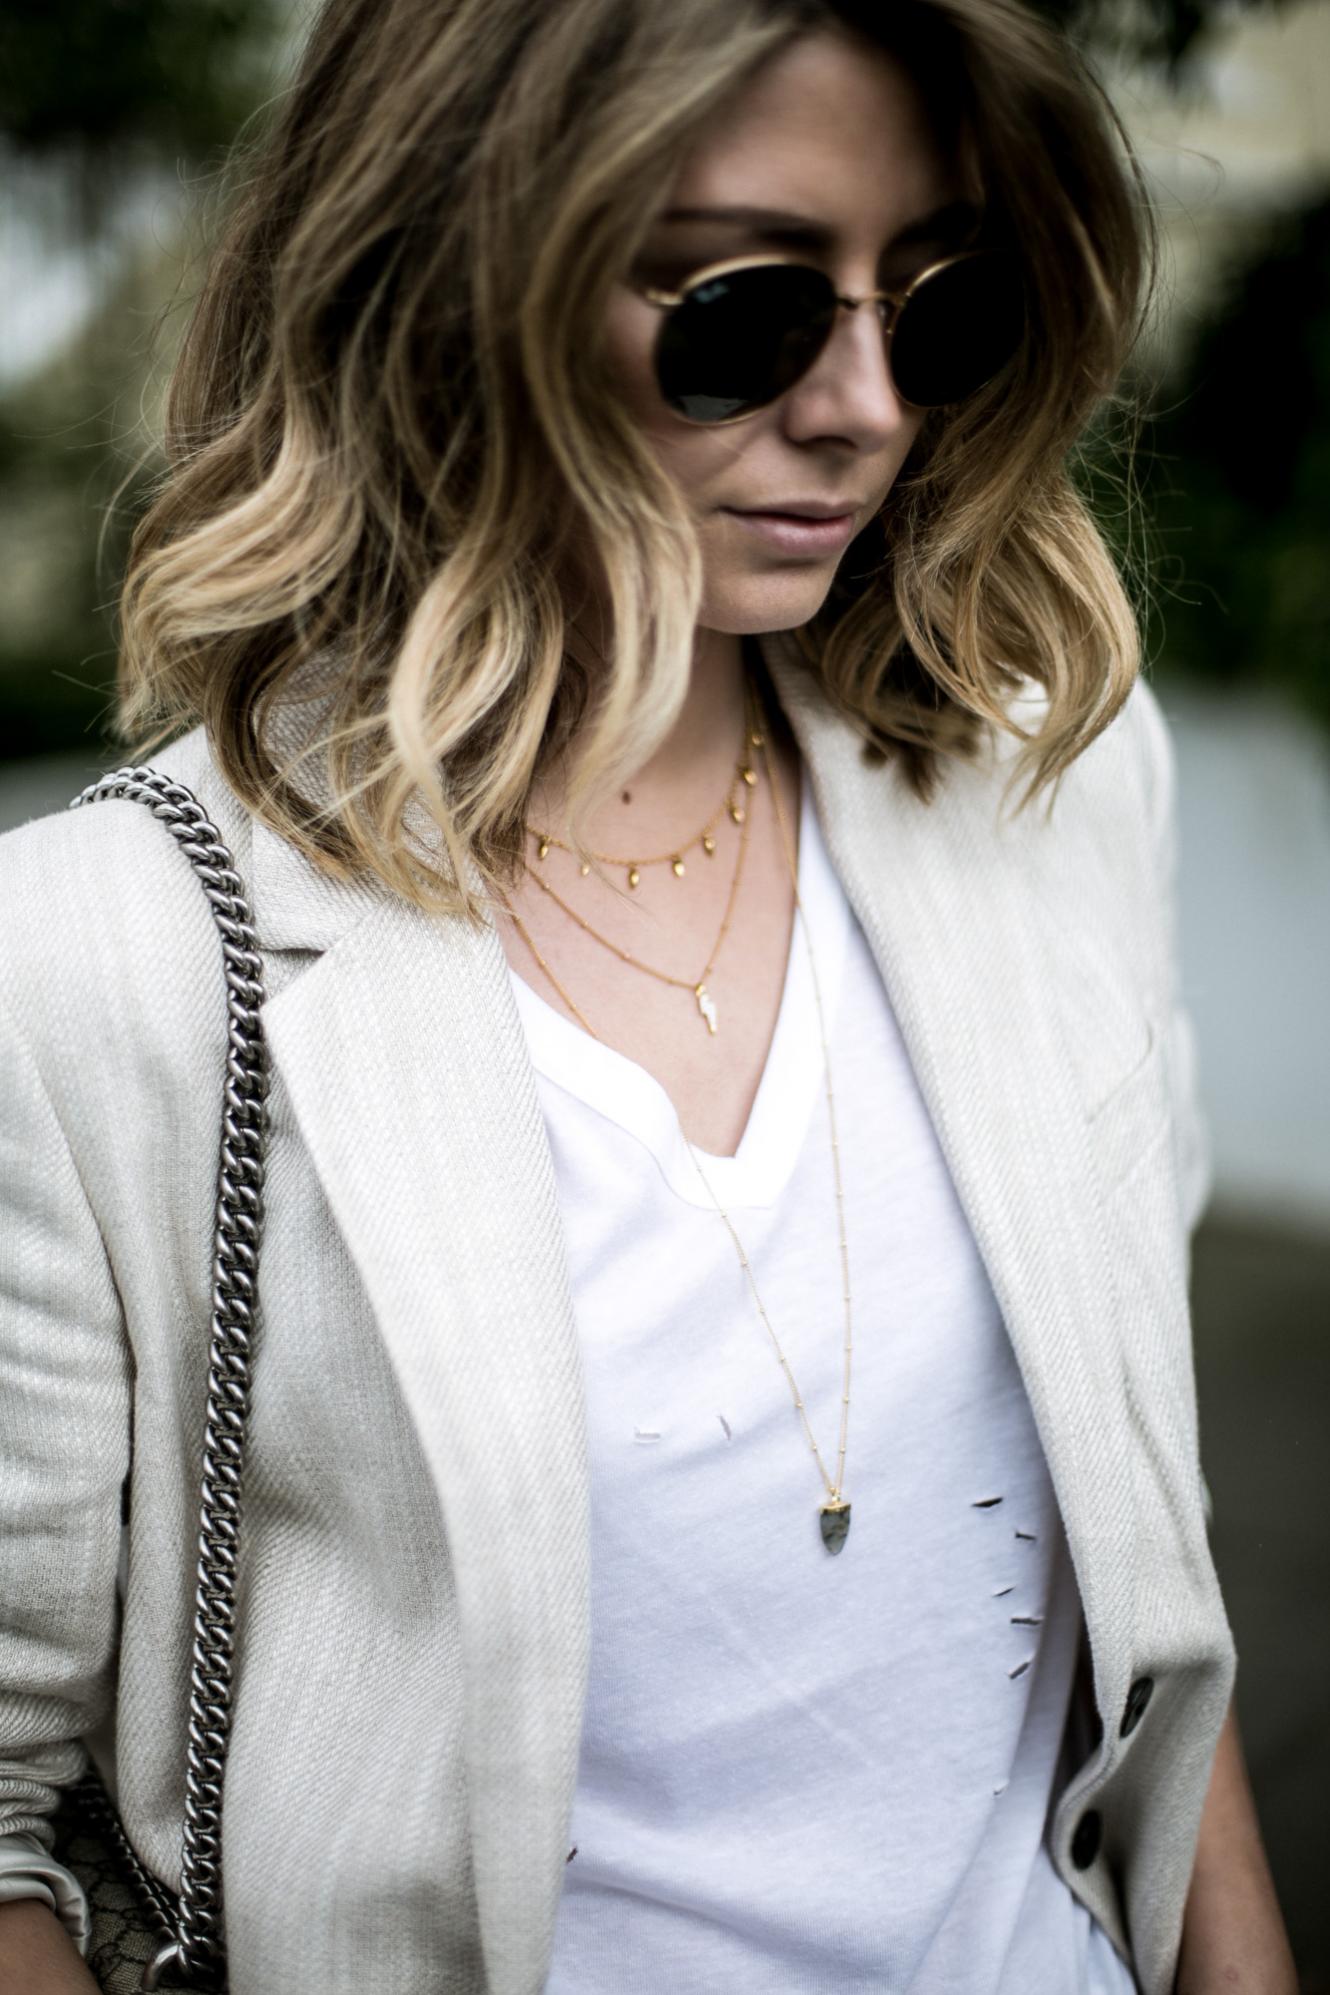 Emma Hill from EJSTYLE wears gold layered necklaces, white nibbled t-shirt, beige linen blazer, gold round Ray-Ban sunglasses